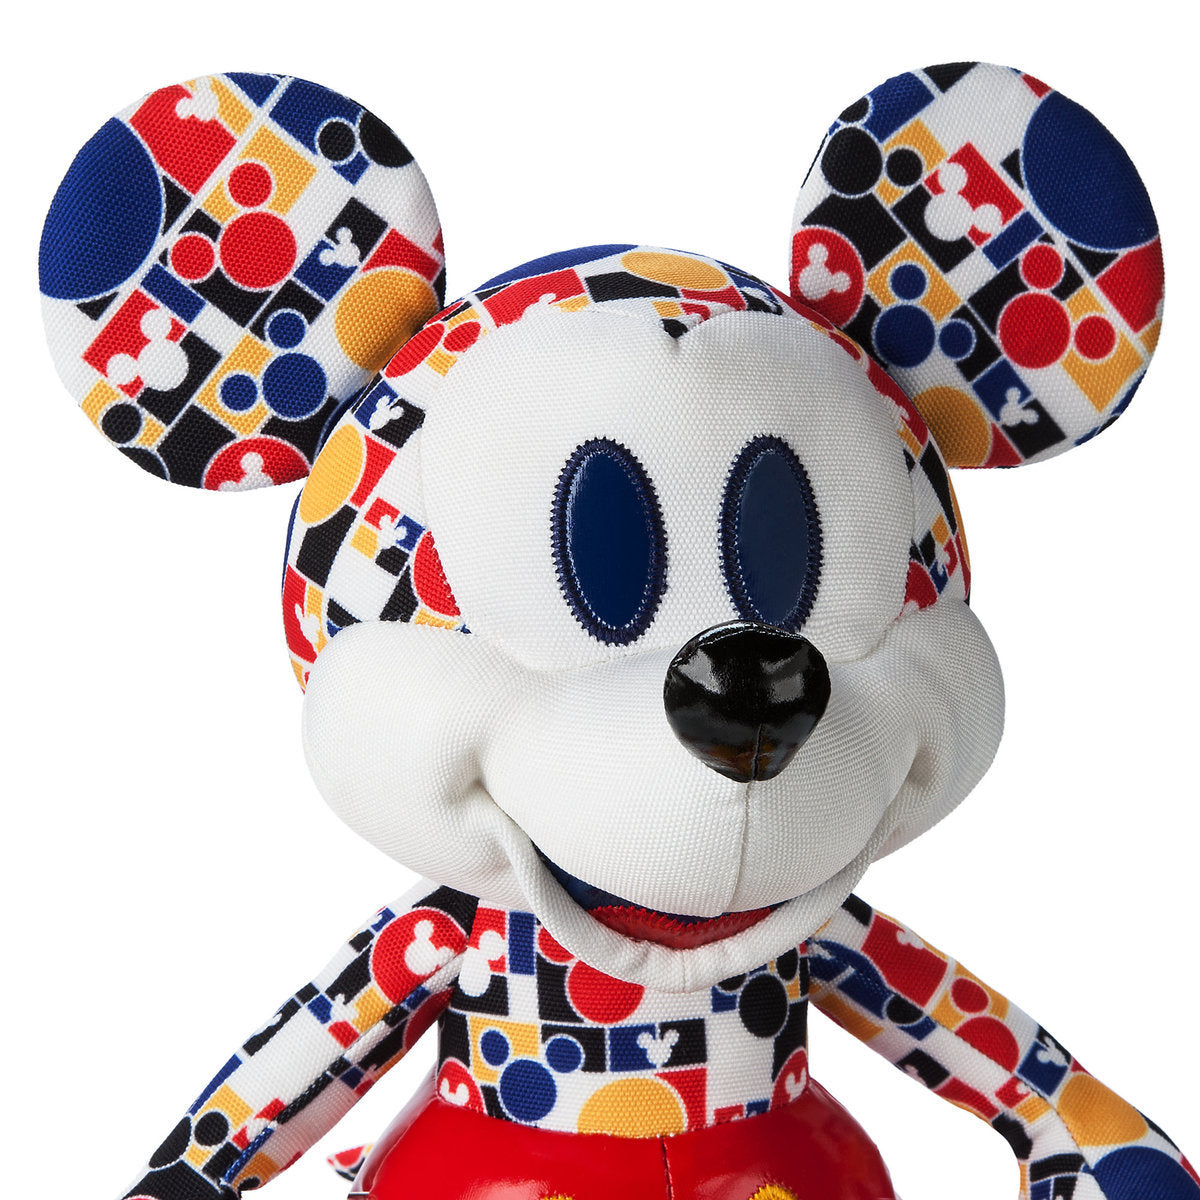 mickey mouse limited edition plush